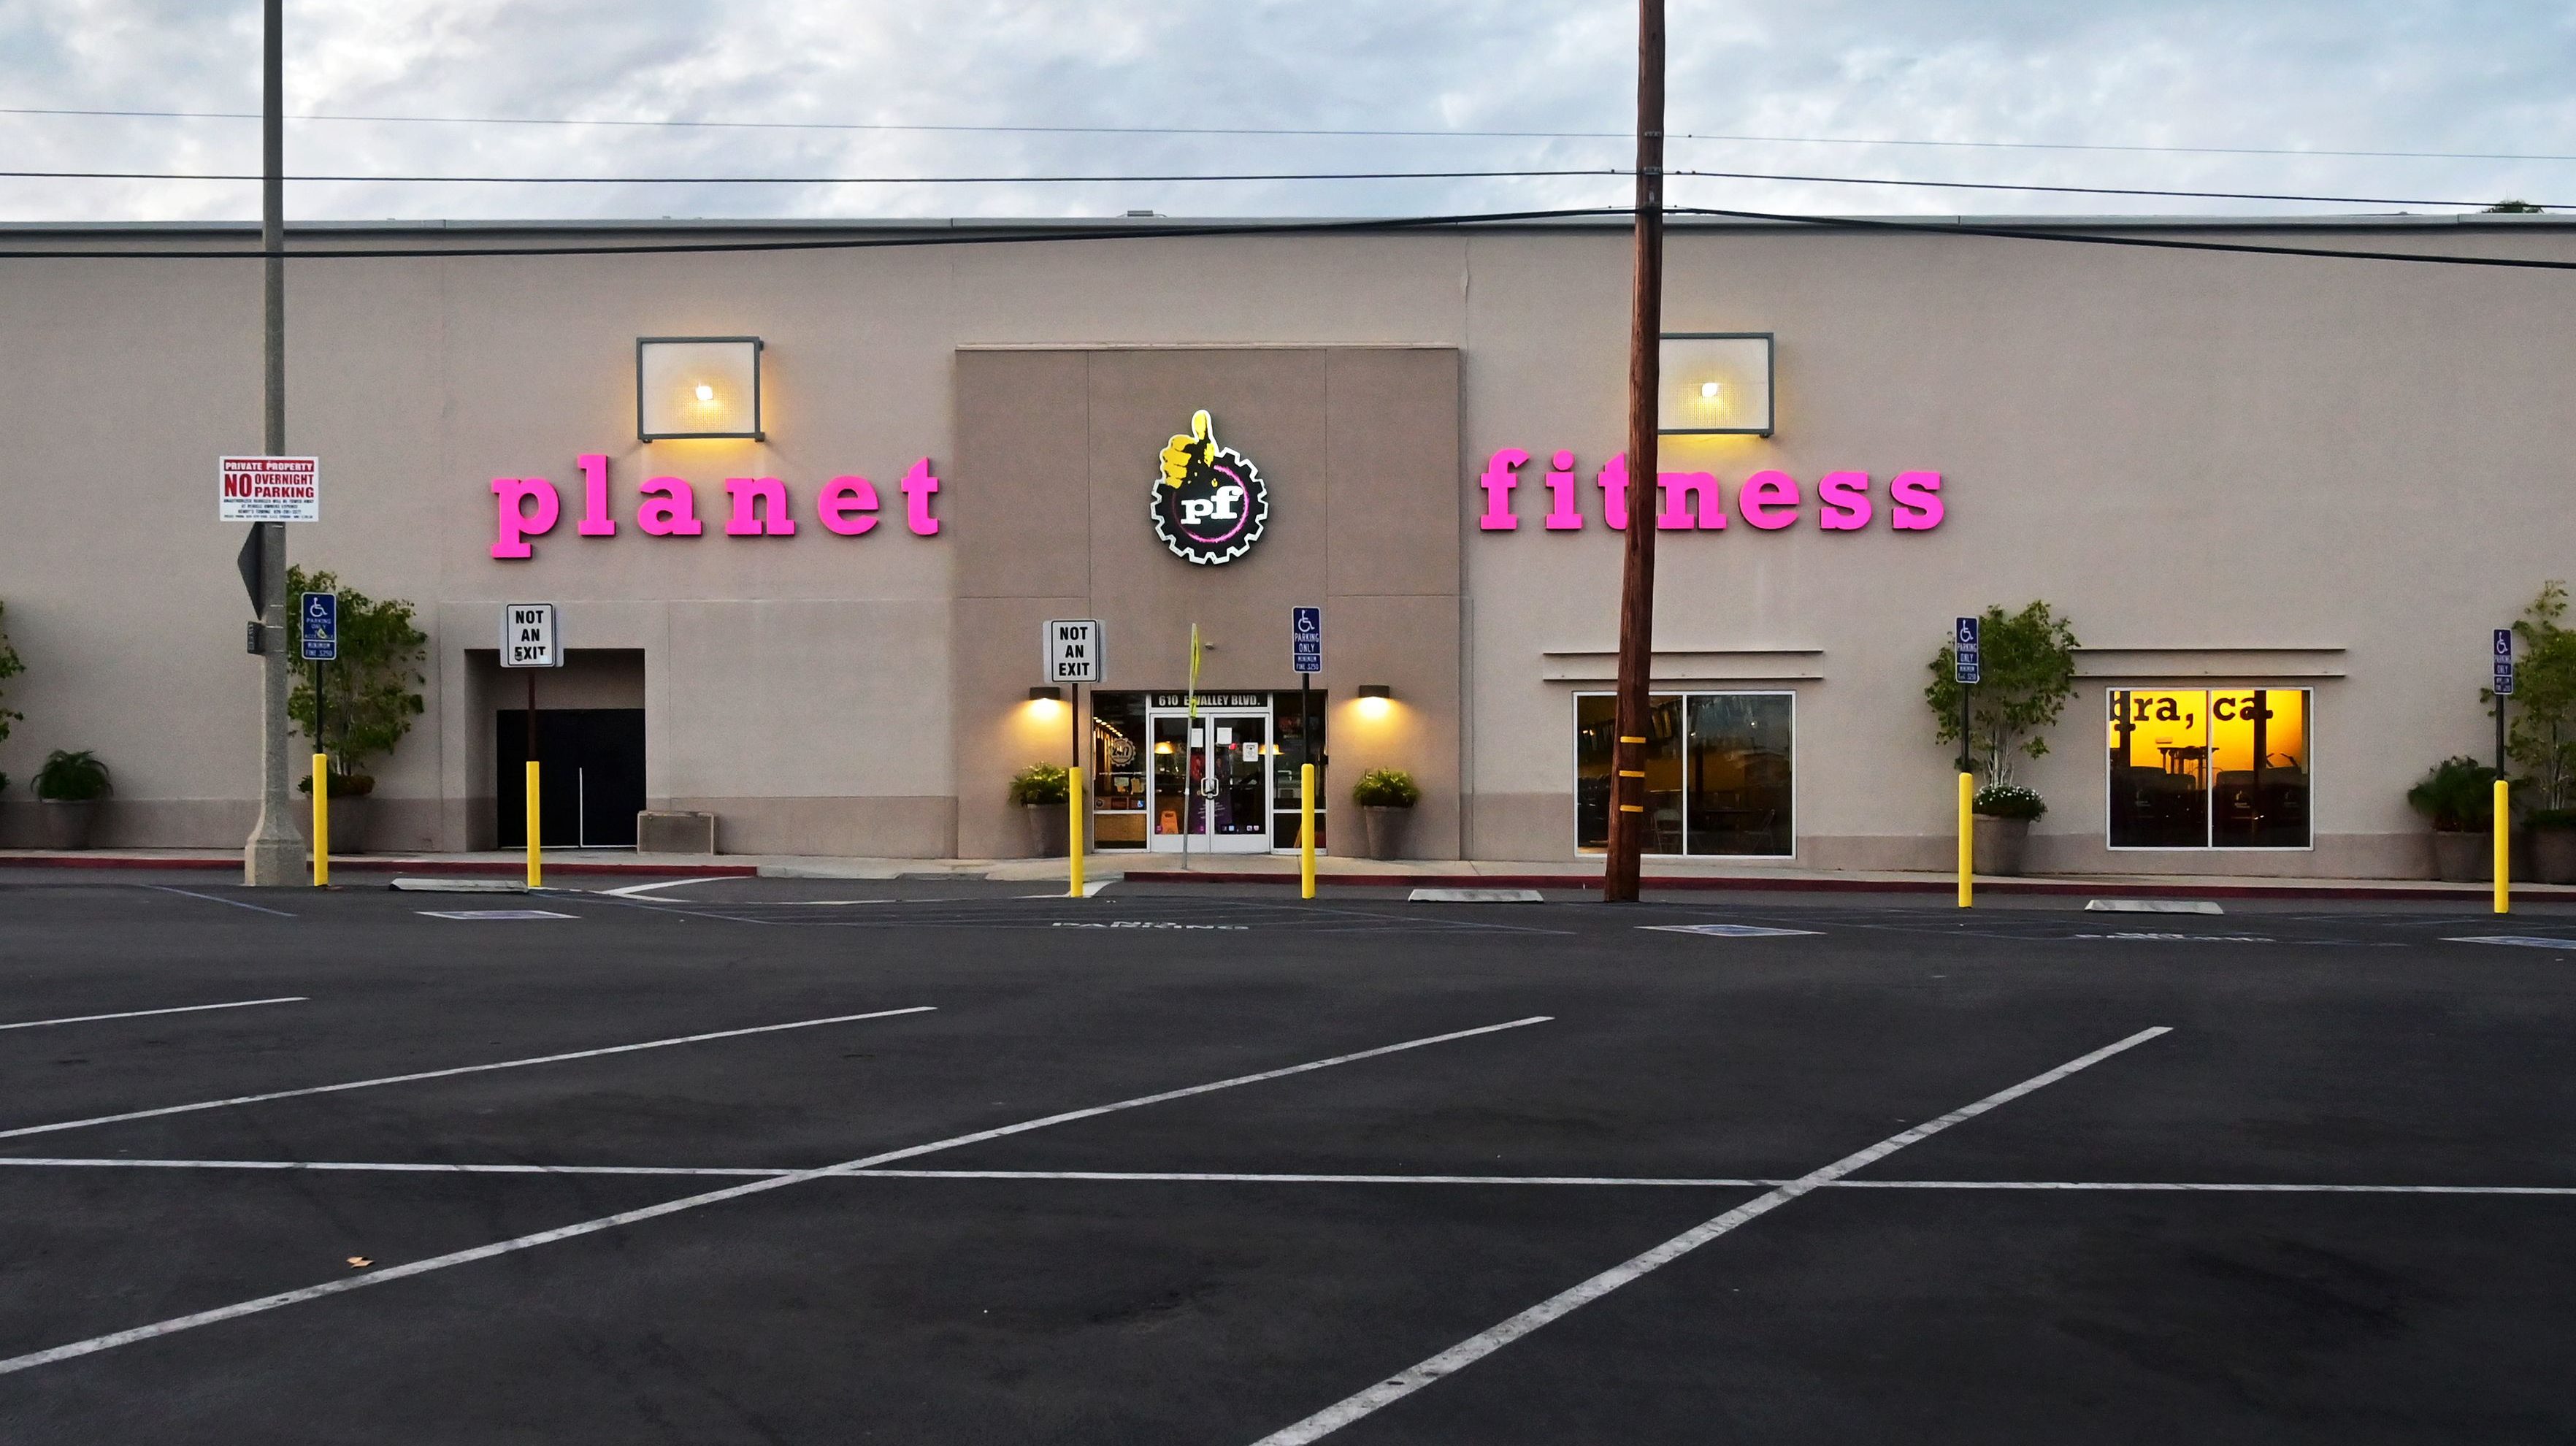 15 Minute Is planet fitness closed on sundays for Build Muscle